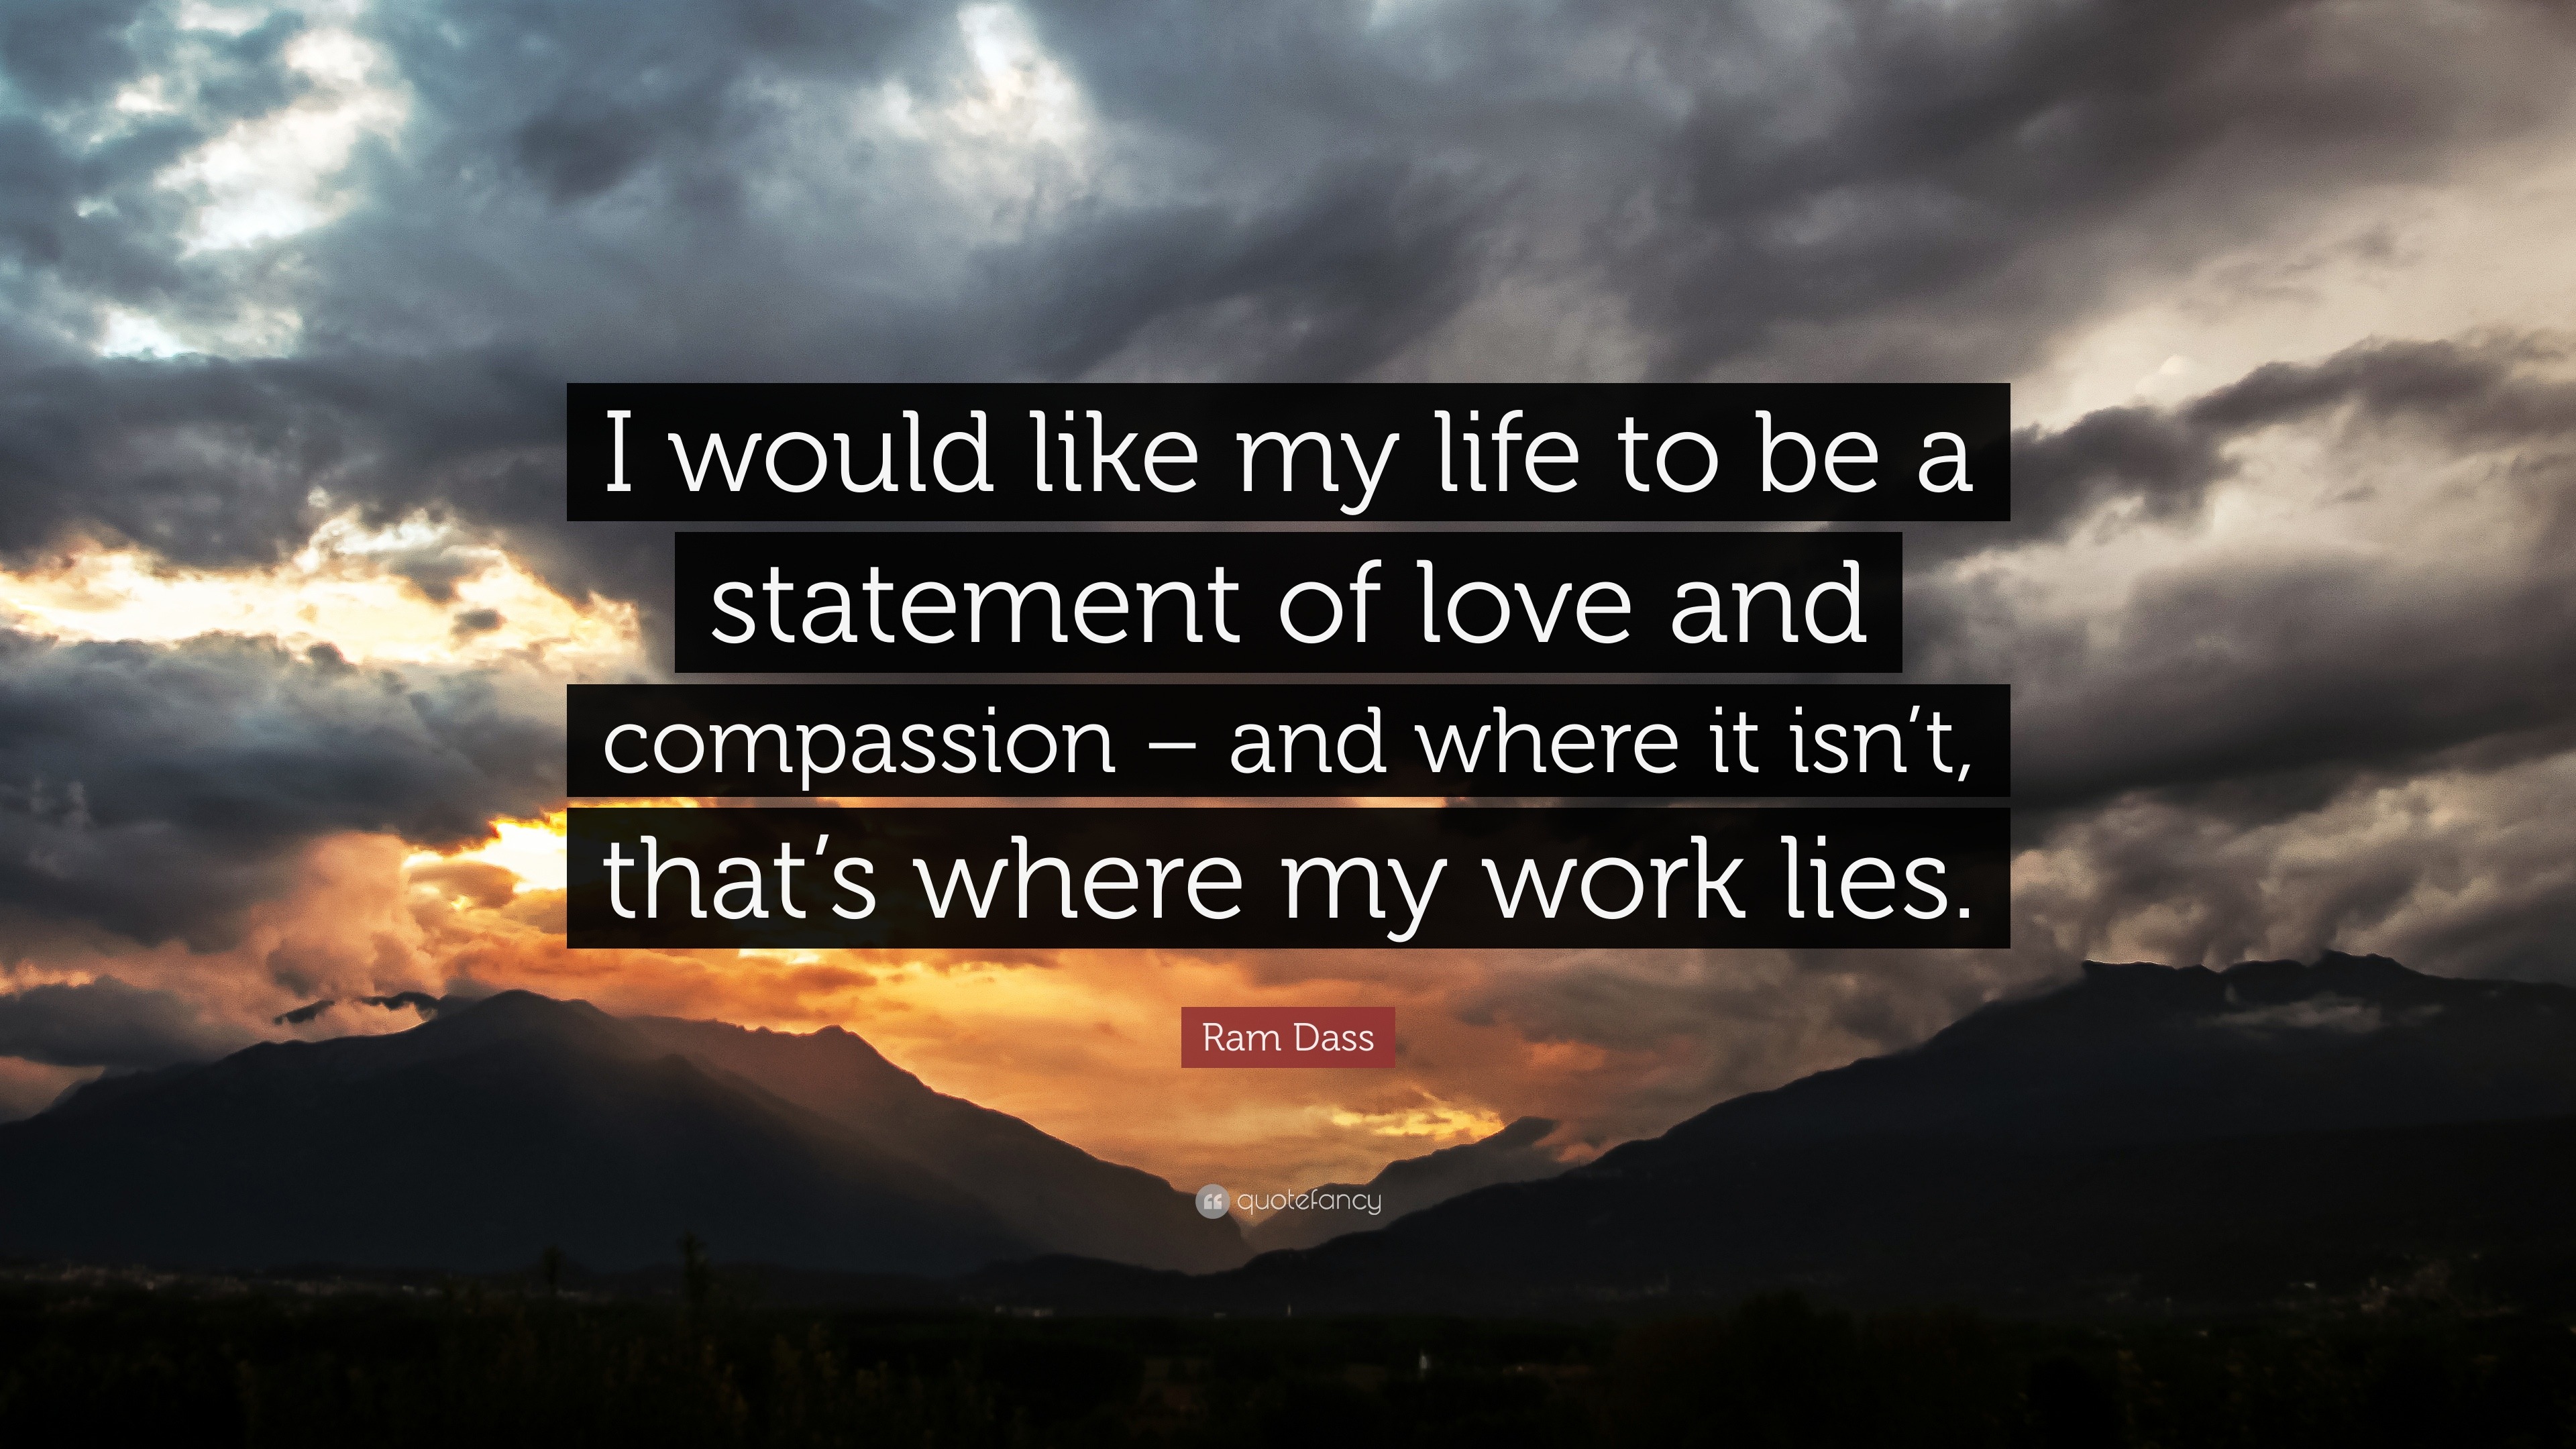 Ram Dass Quote I Would Like My Life To Be A Statement Of Love And Compassion